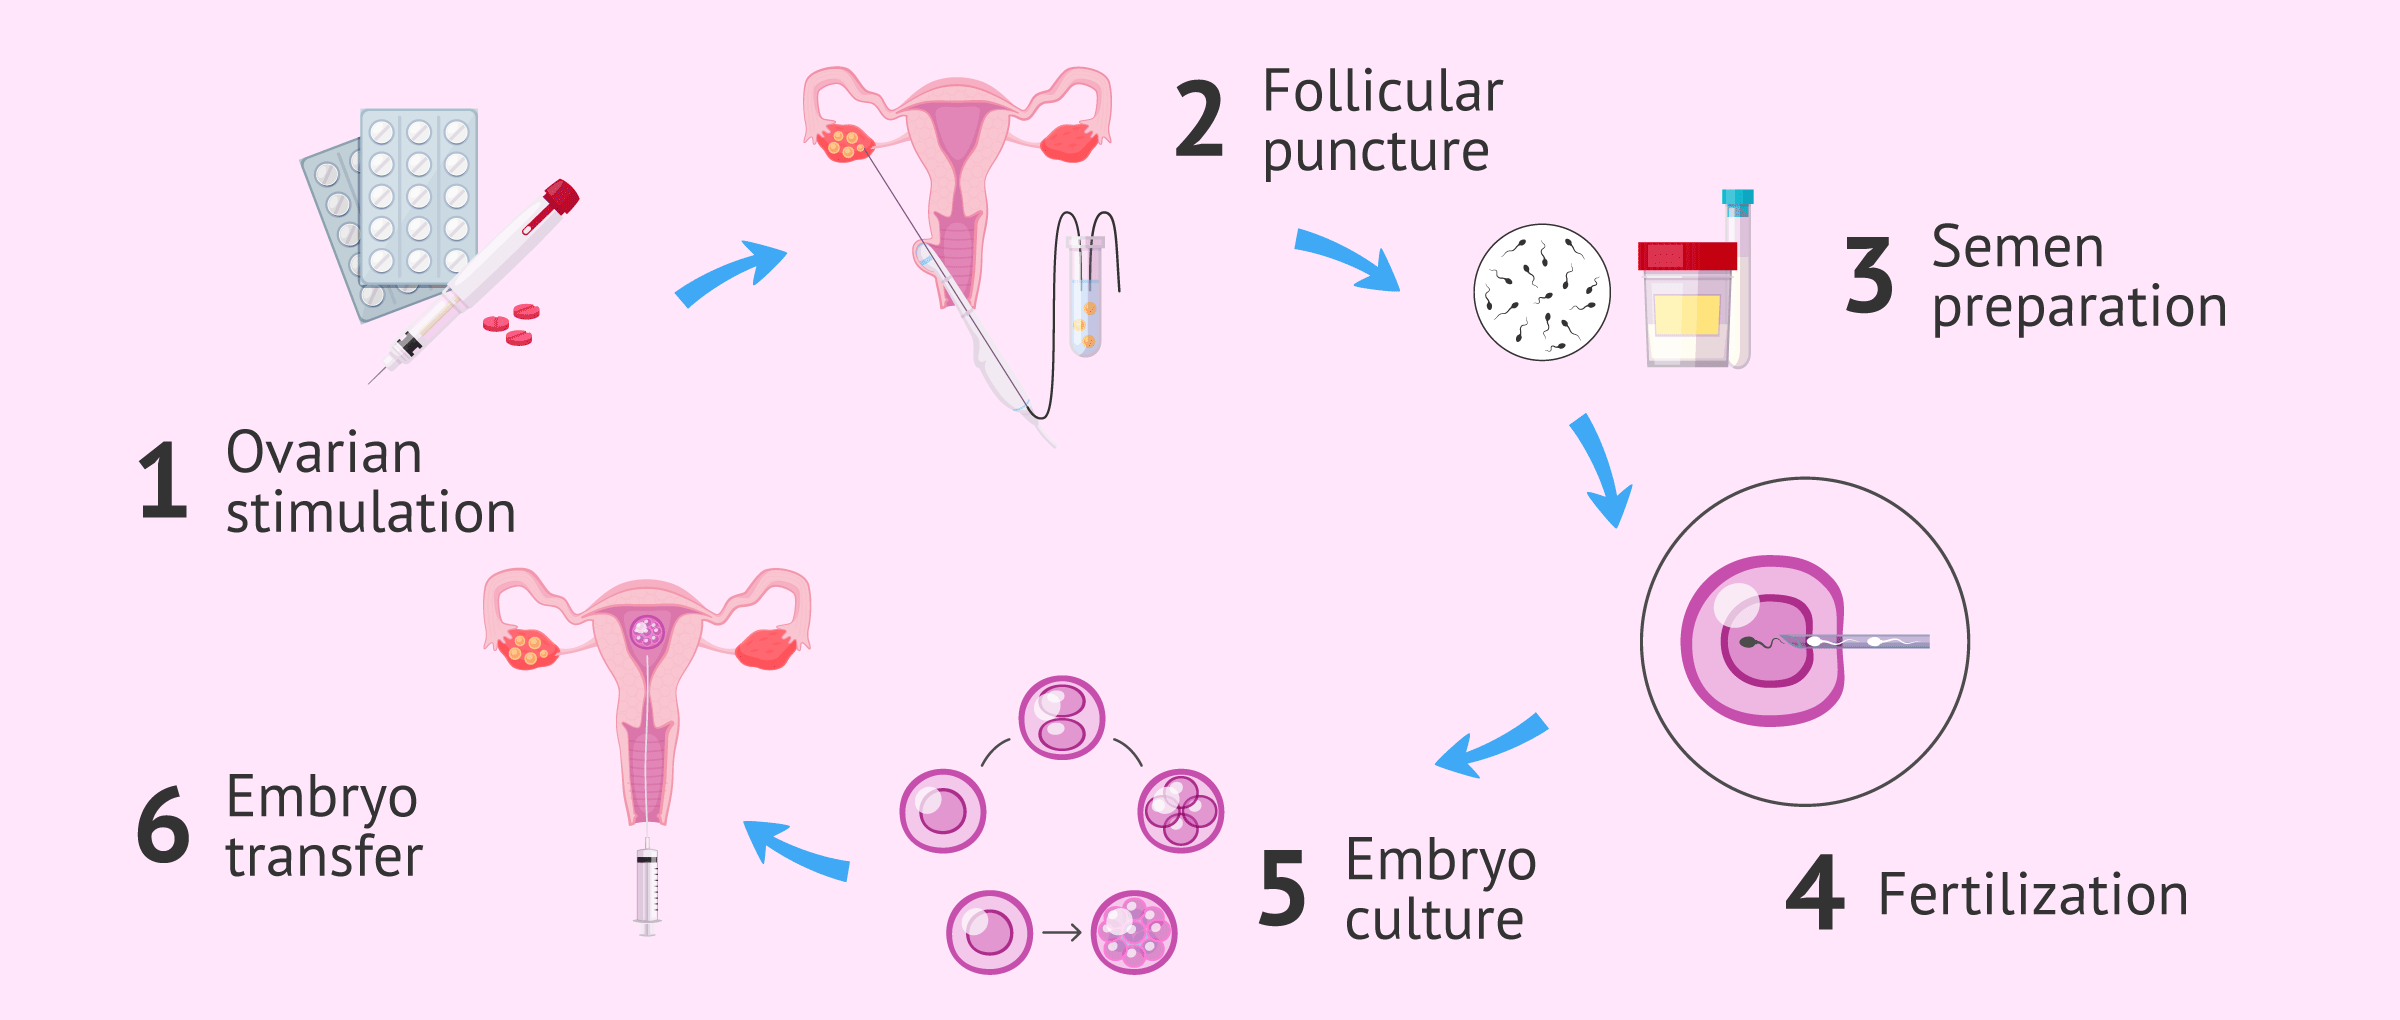 What is the whole IVF process like?